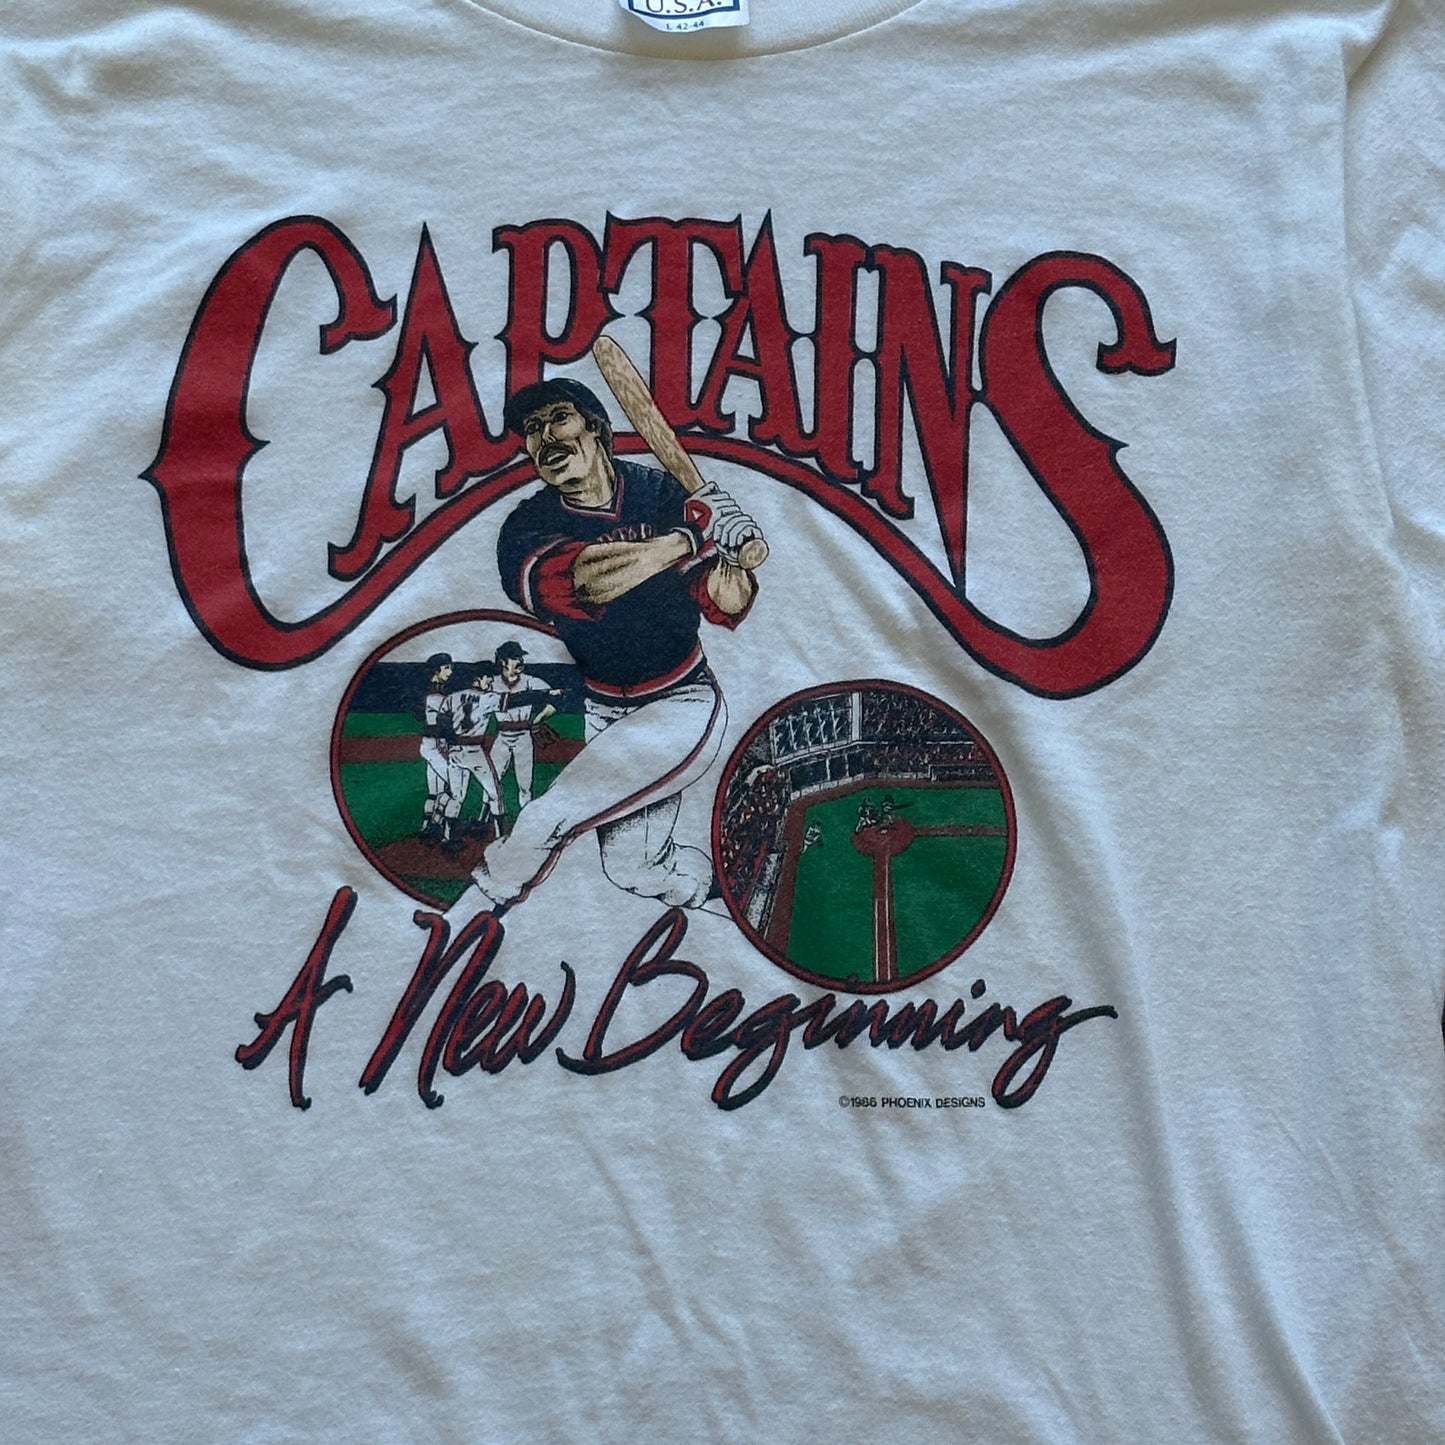 86' Captains Tee